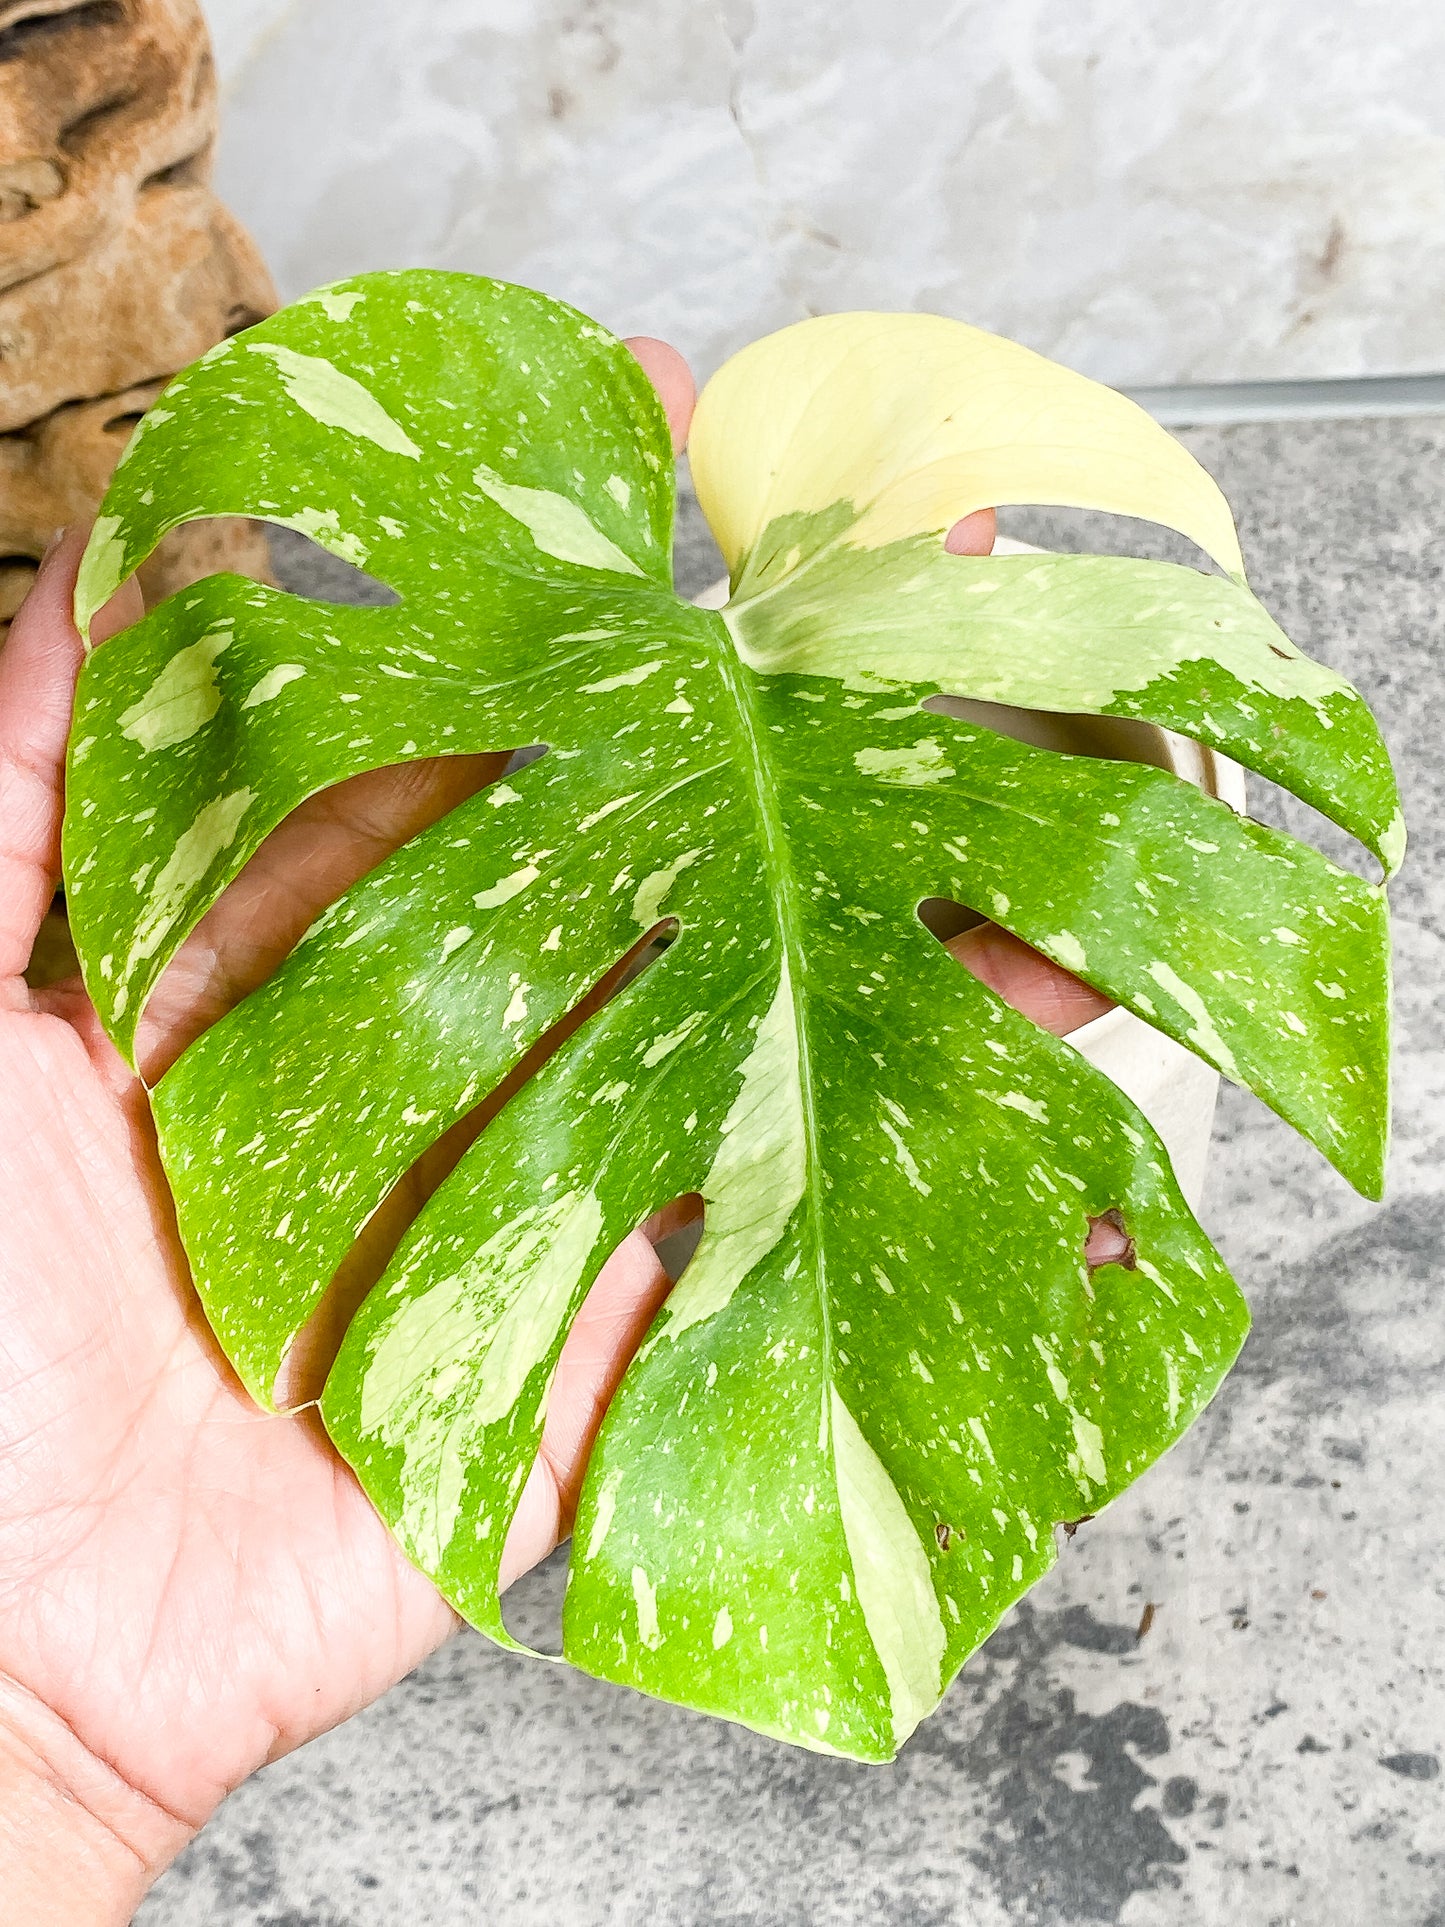 Monstera Thai Constellation Rooting Top Cutting 2 leaves Highly Variegated